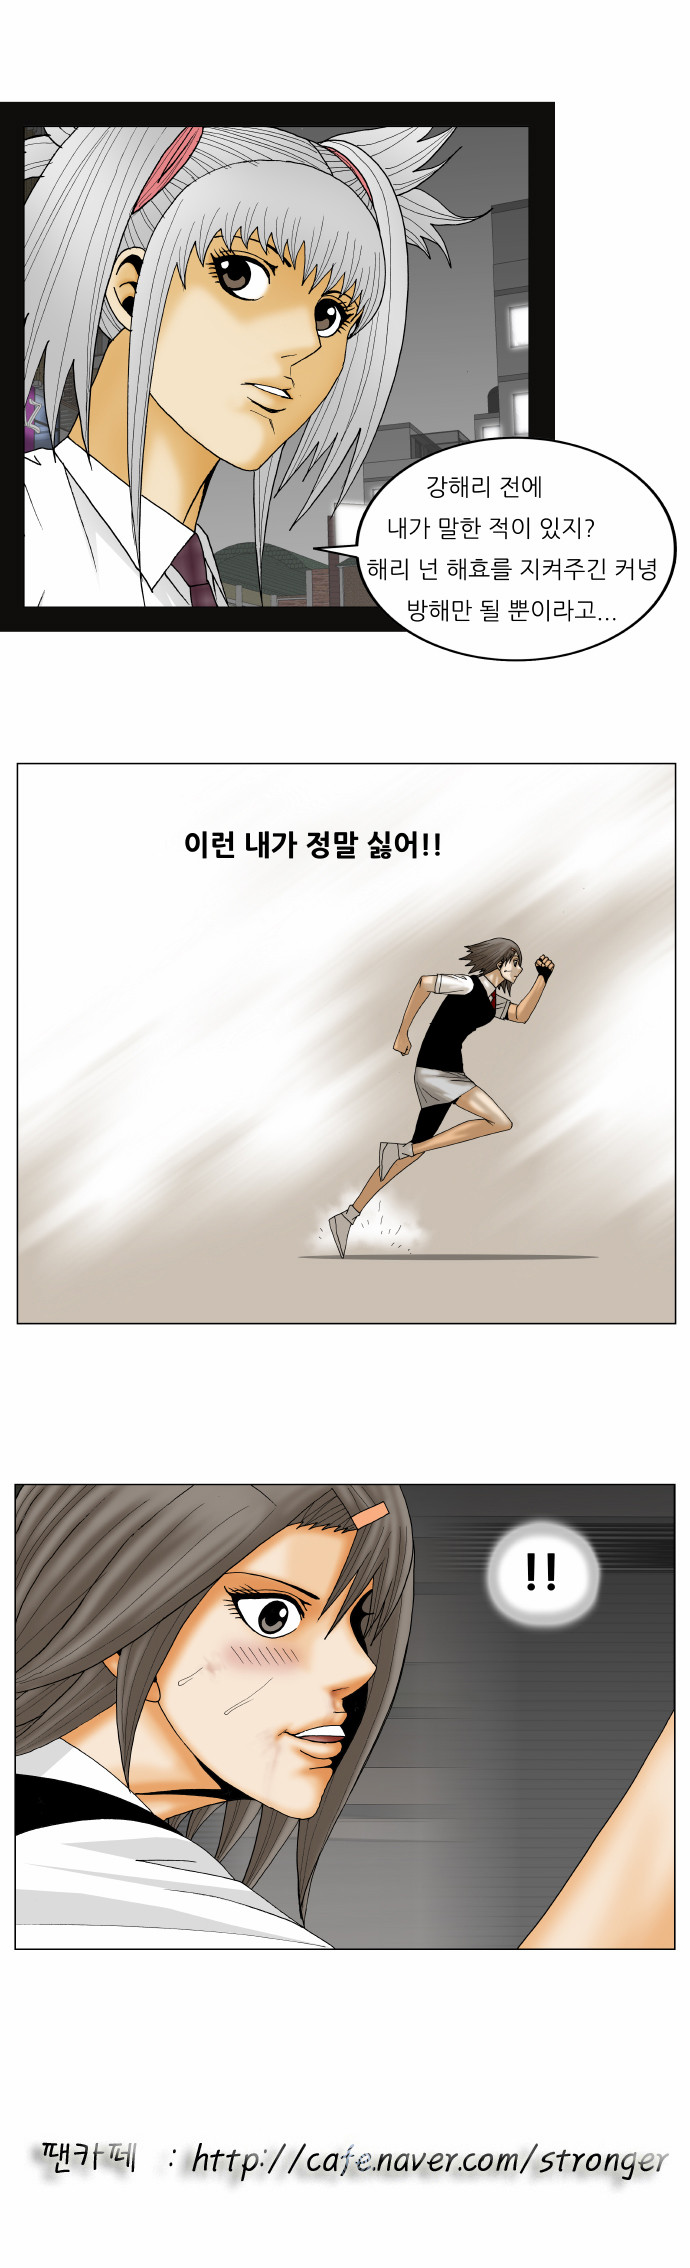 Ultimate Legend - Kang Hae Hyo - Chapter 152 - Page 31